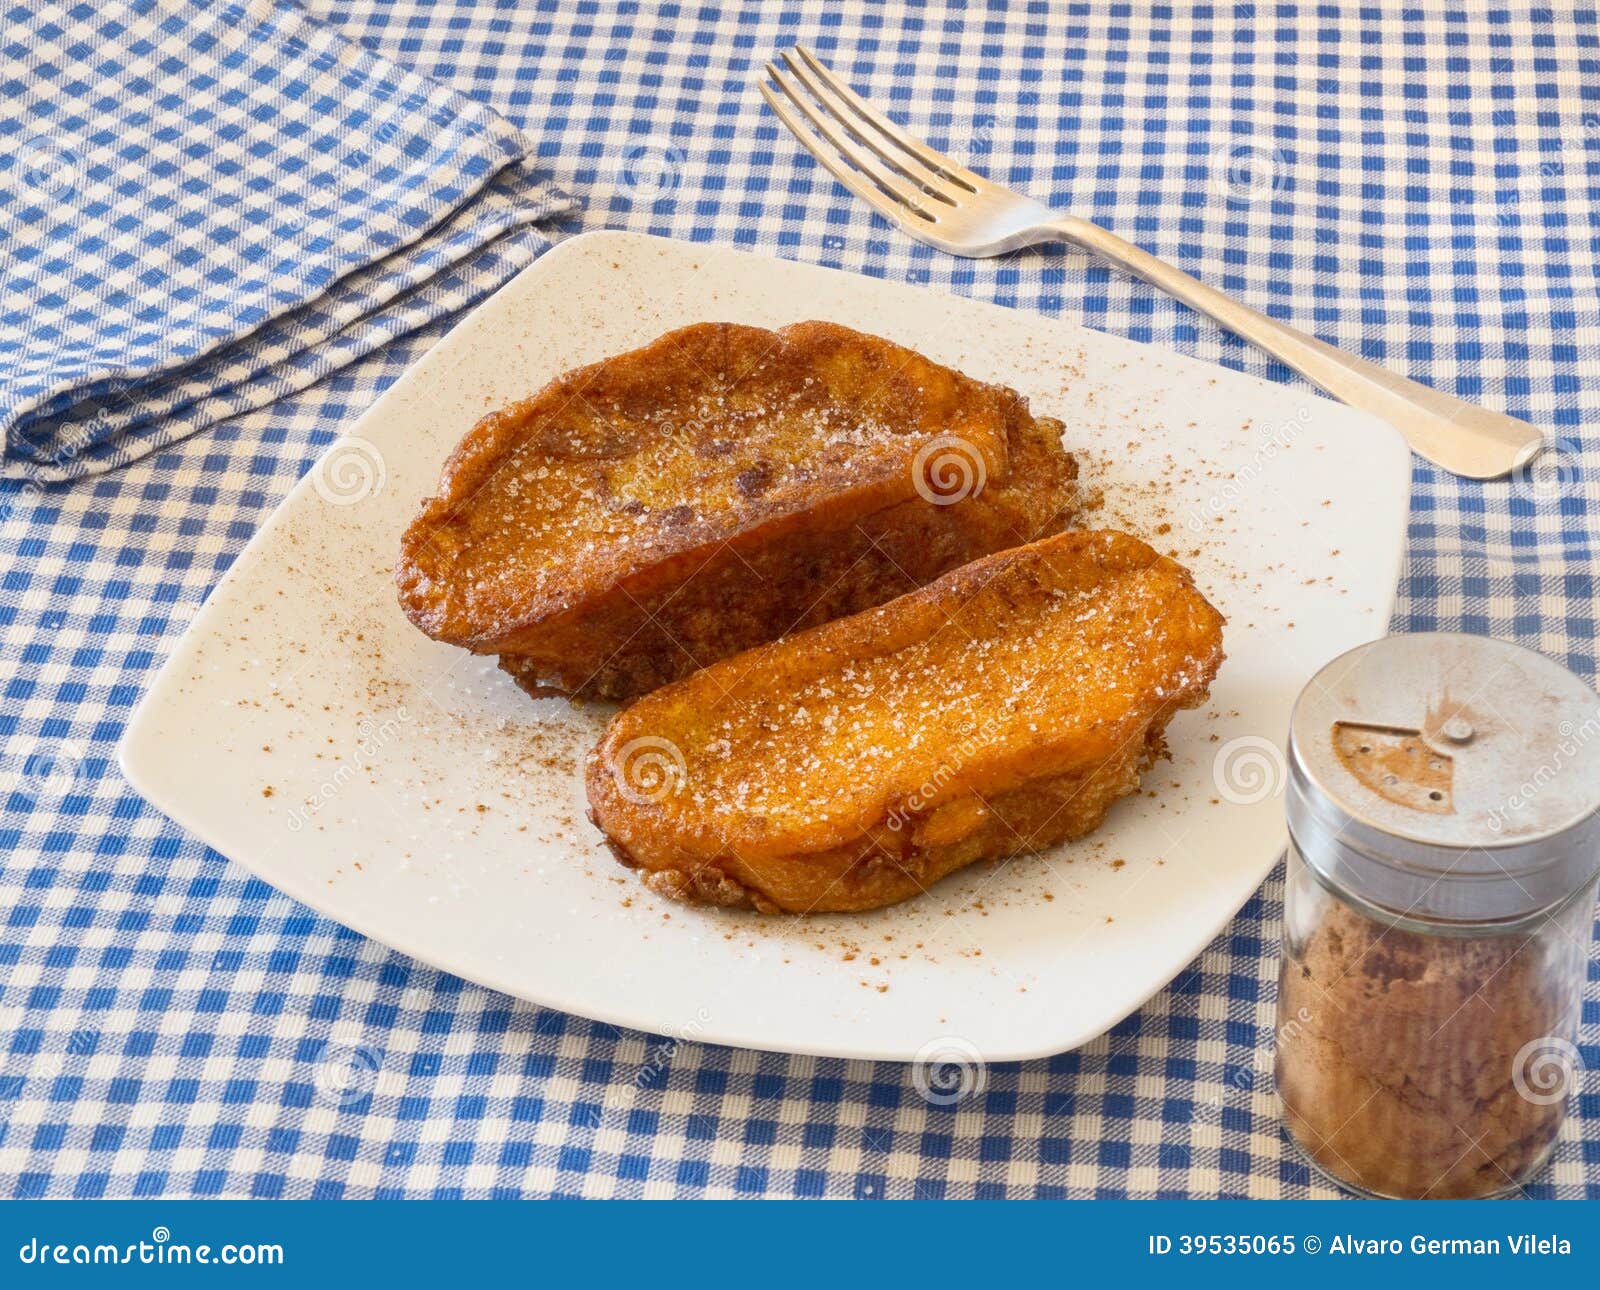 torrijas, typical spanish sweet in lent and easter or holy week.